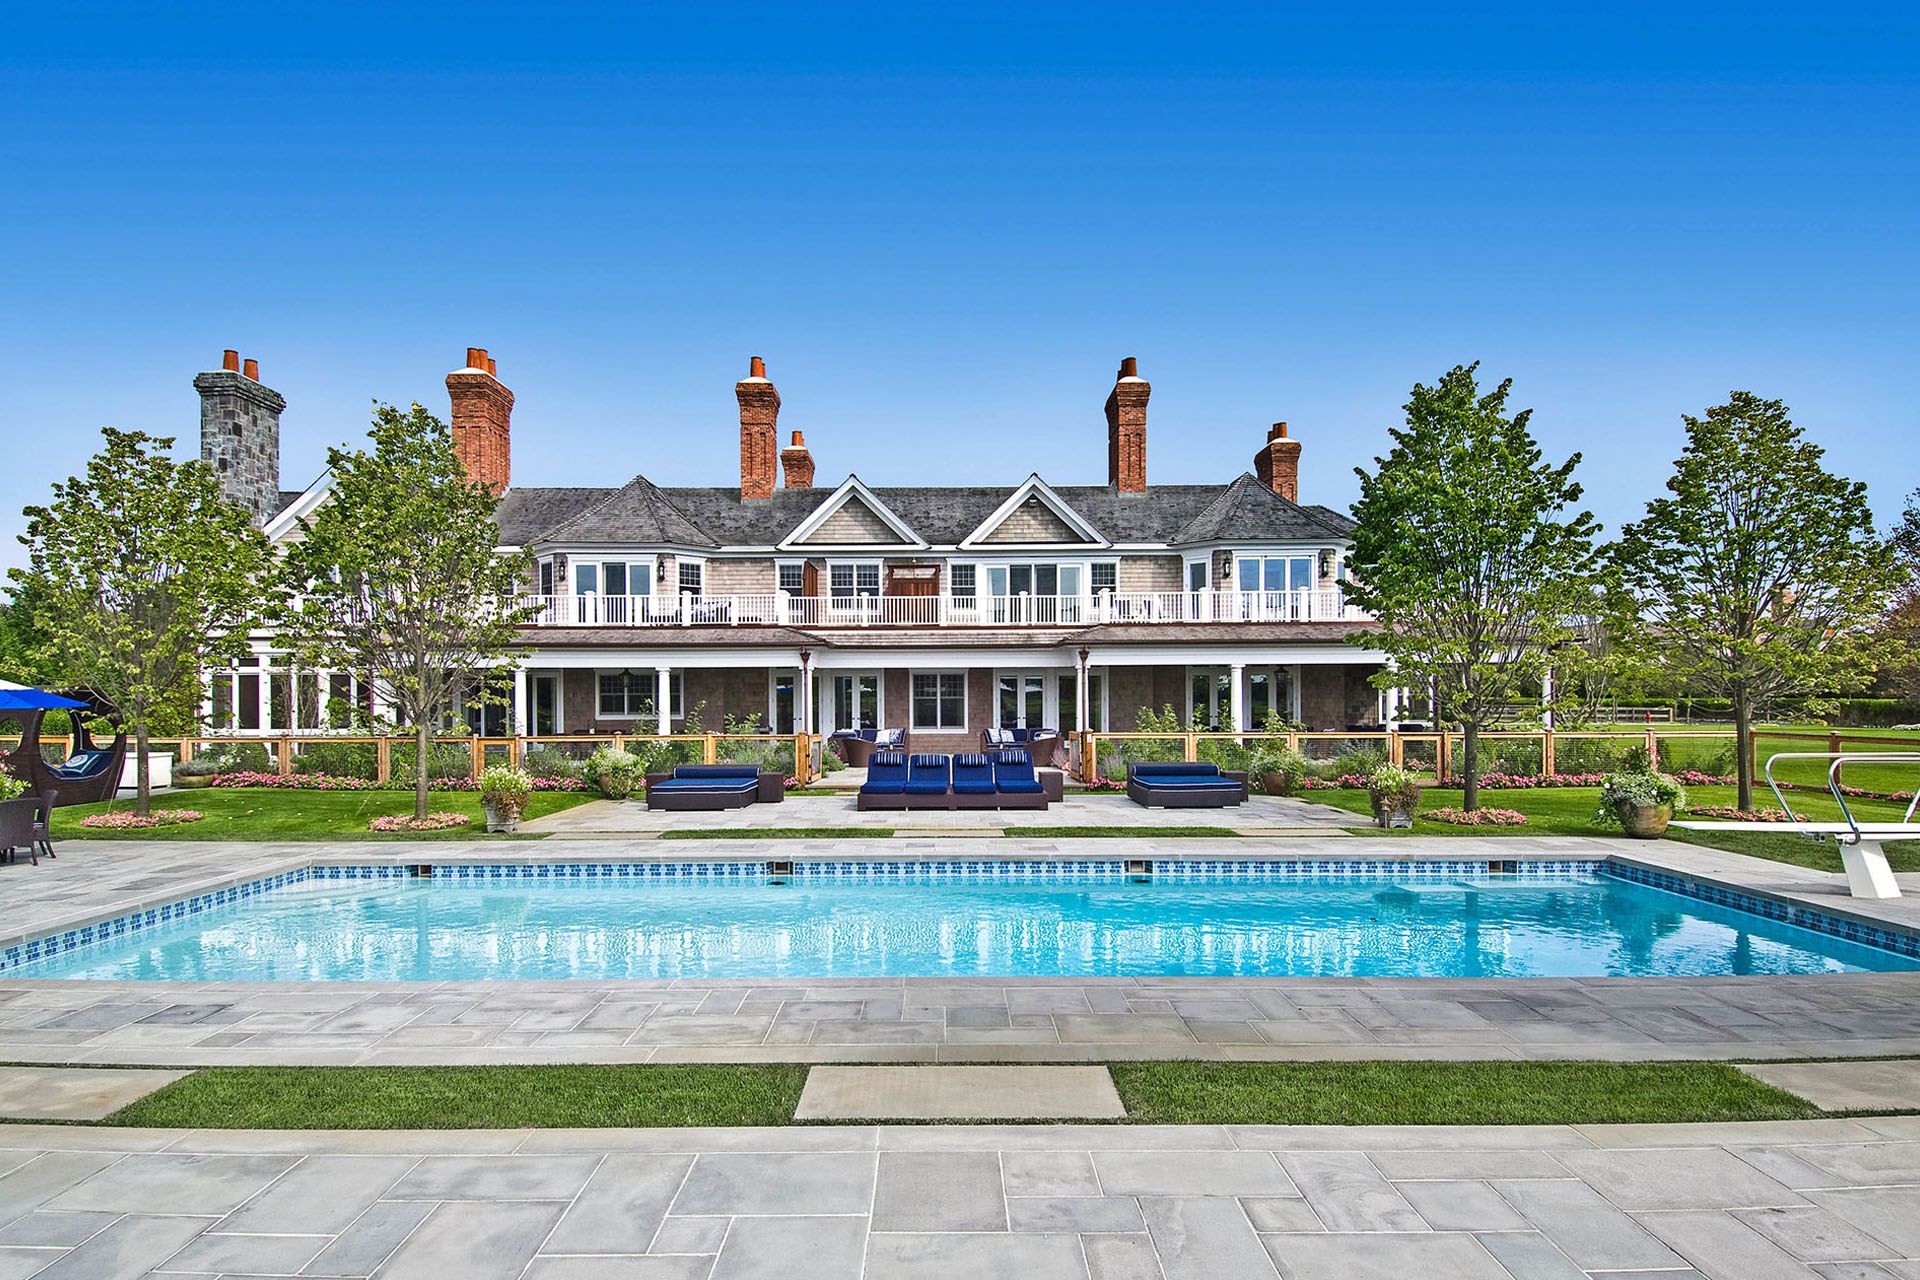 Beyoncé and Jay-Z don't have time for their new mansion in East Hampton